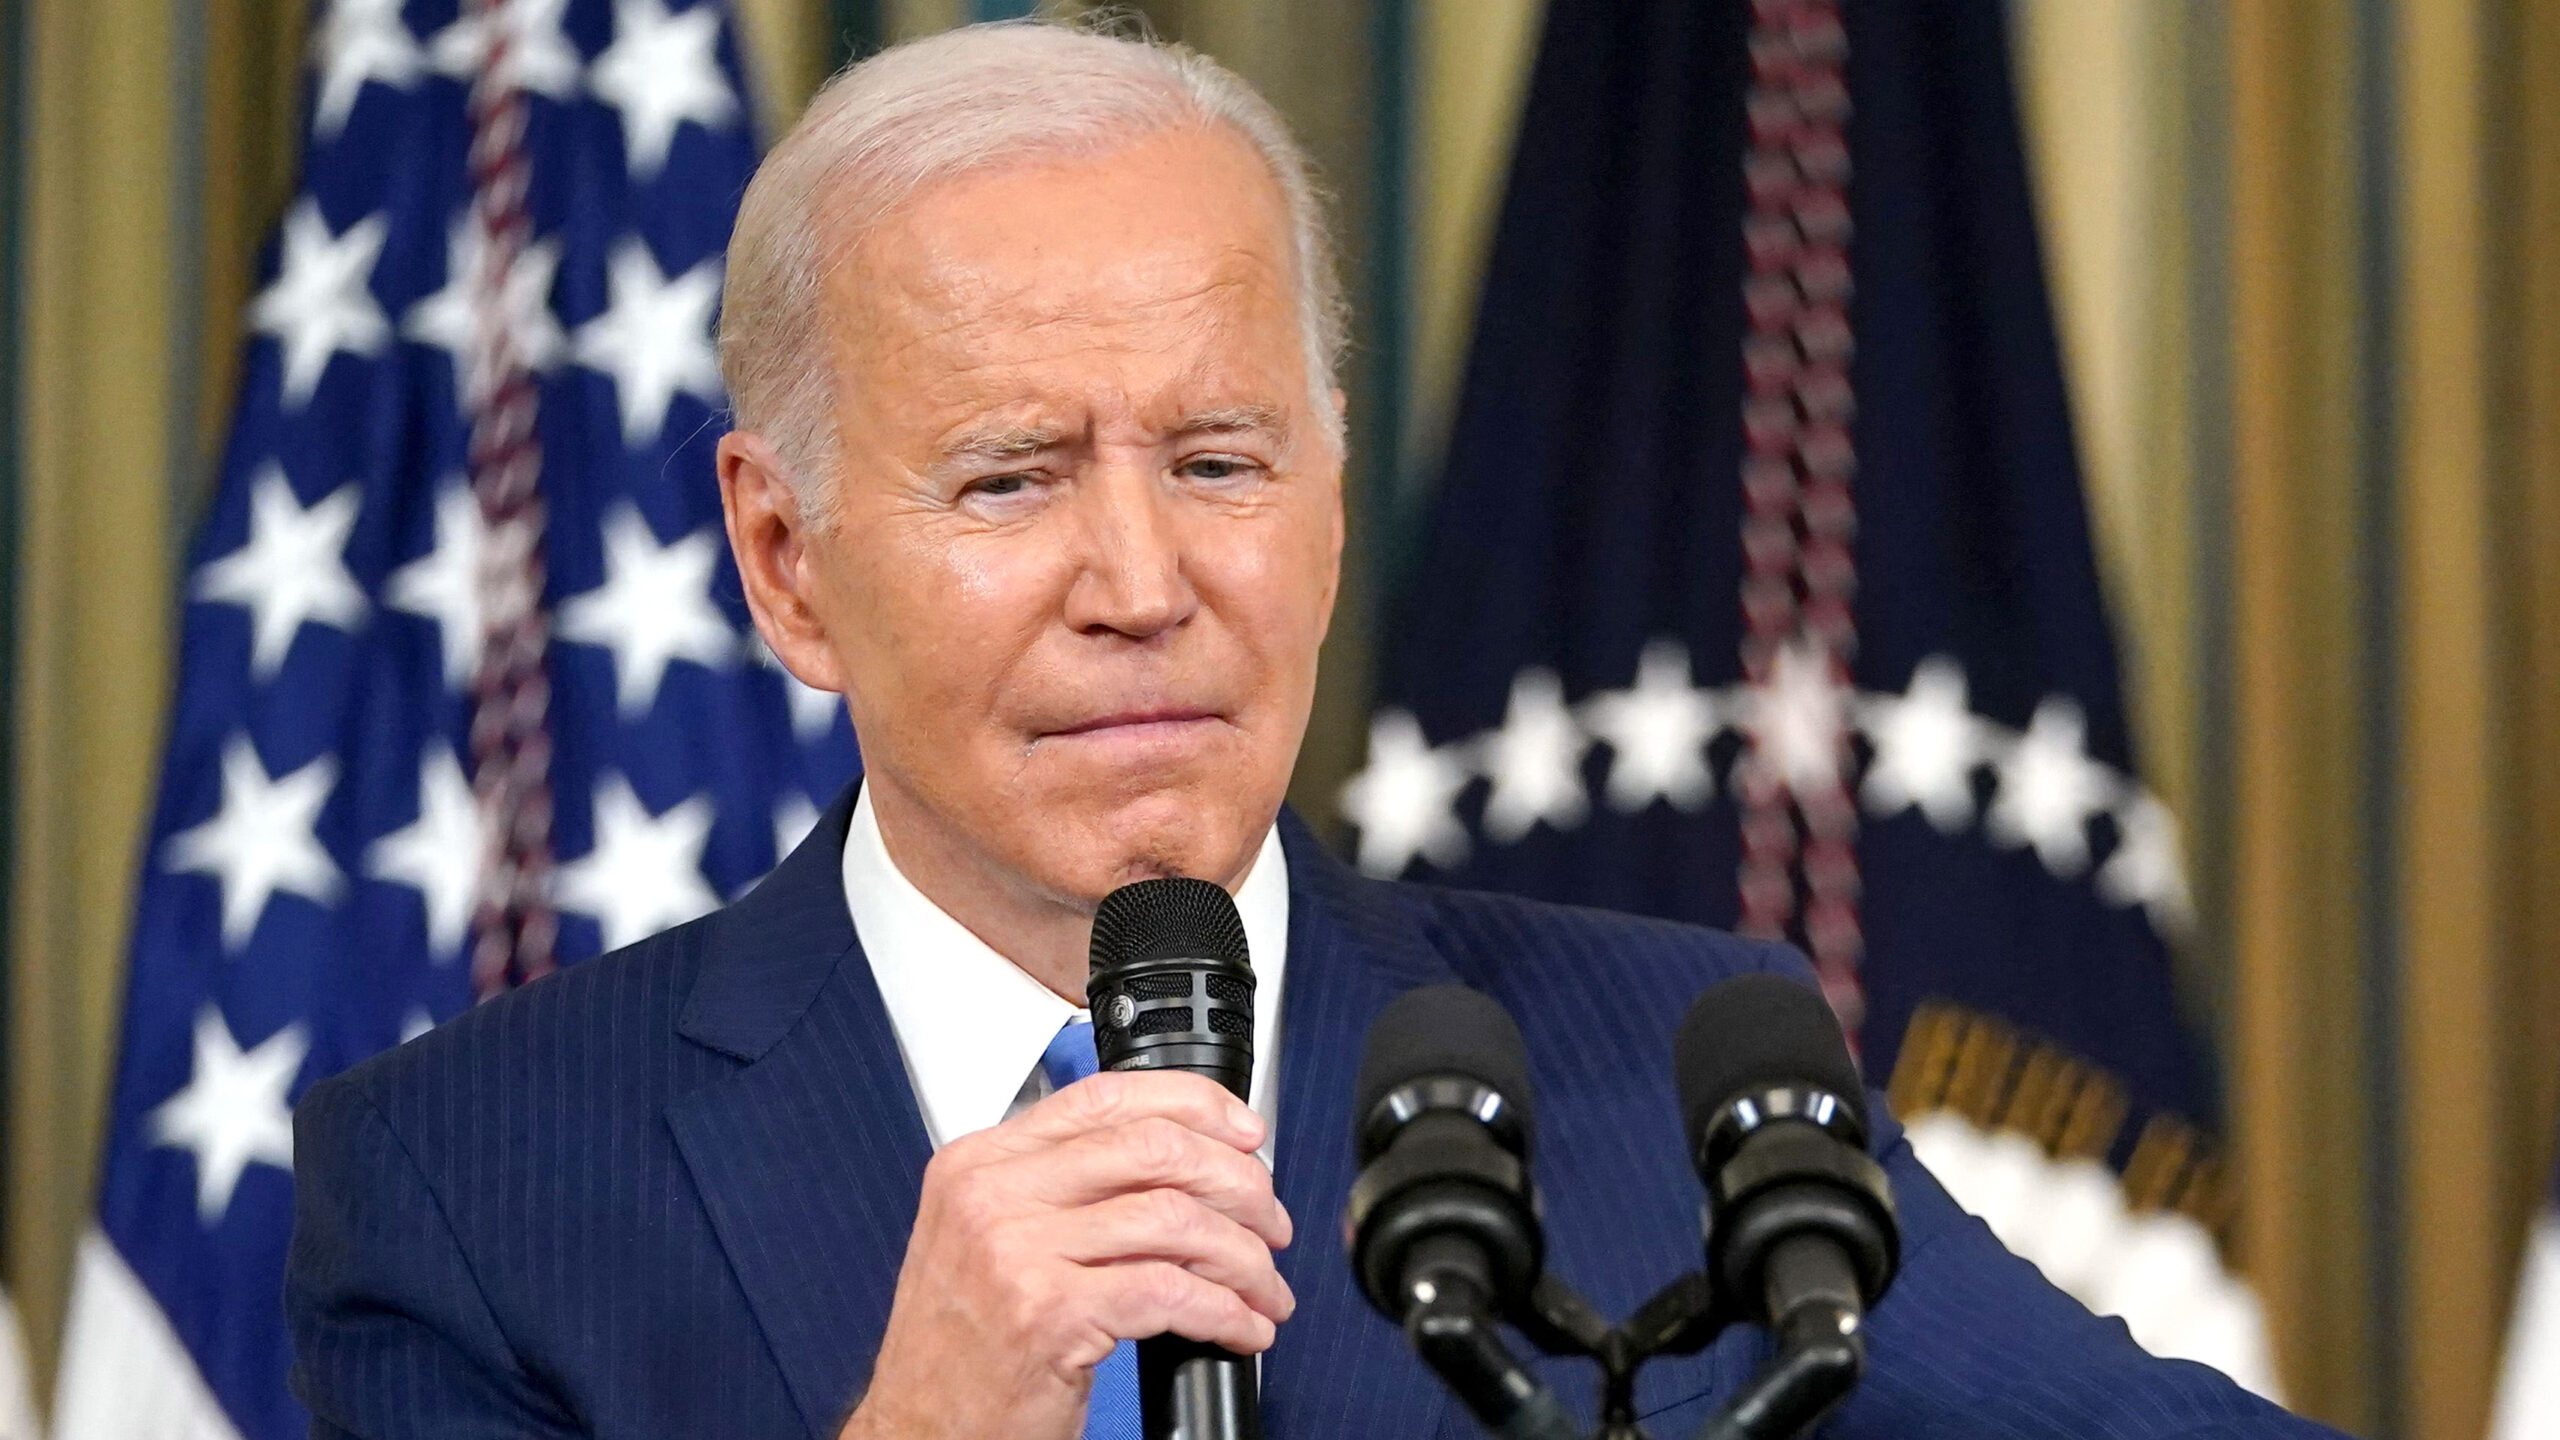 Experts Weigh In On FBI Search Of Biden Home: He Consented Because ‘There Was Probable Cause Of Crimes’